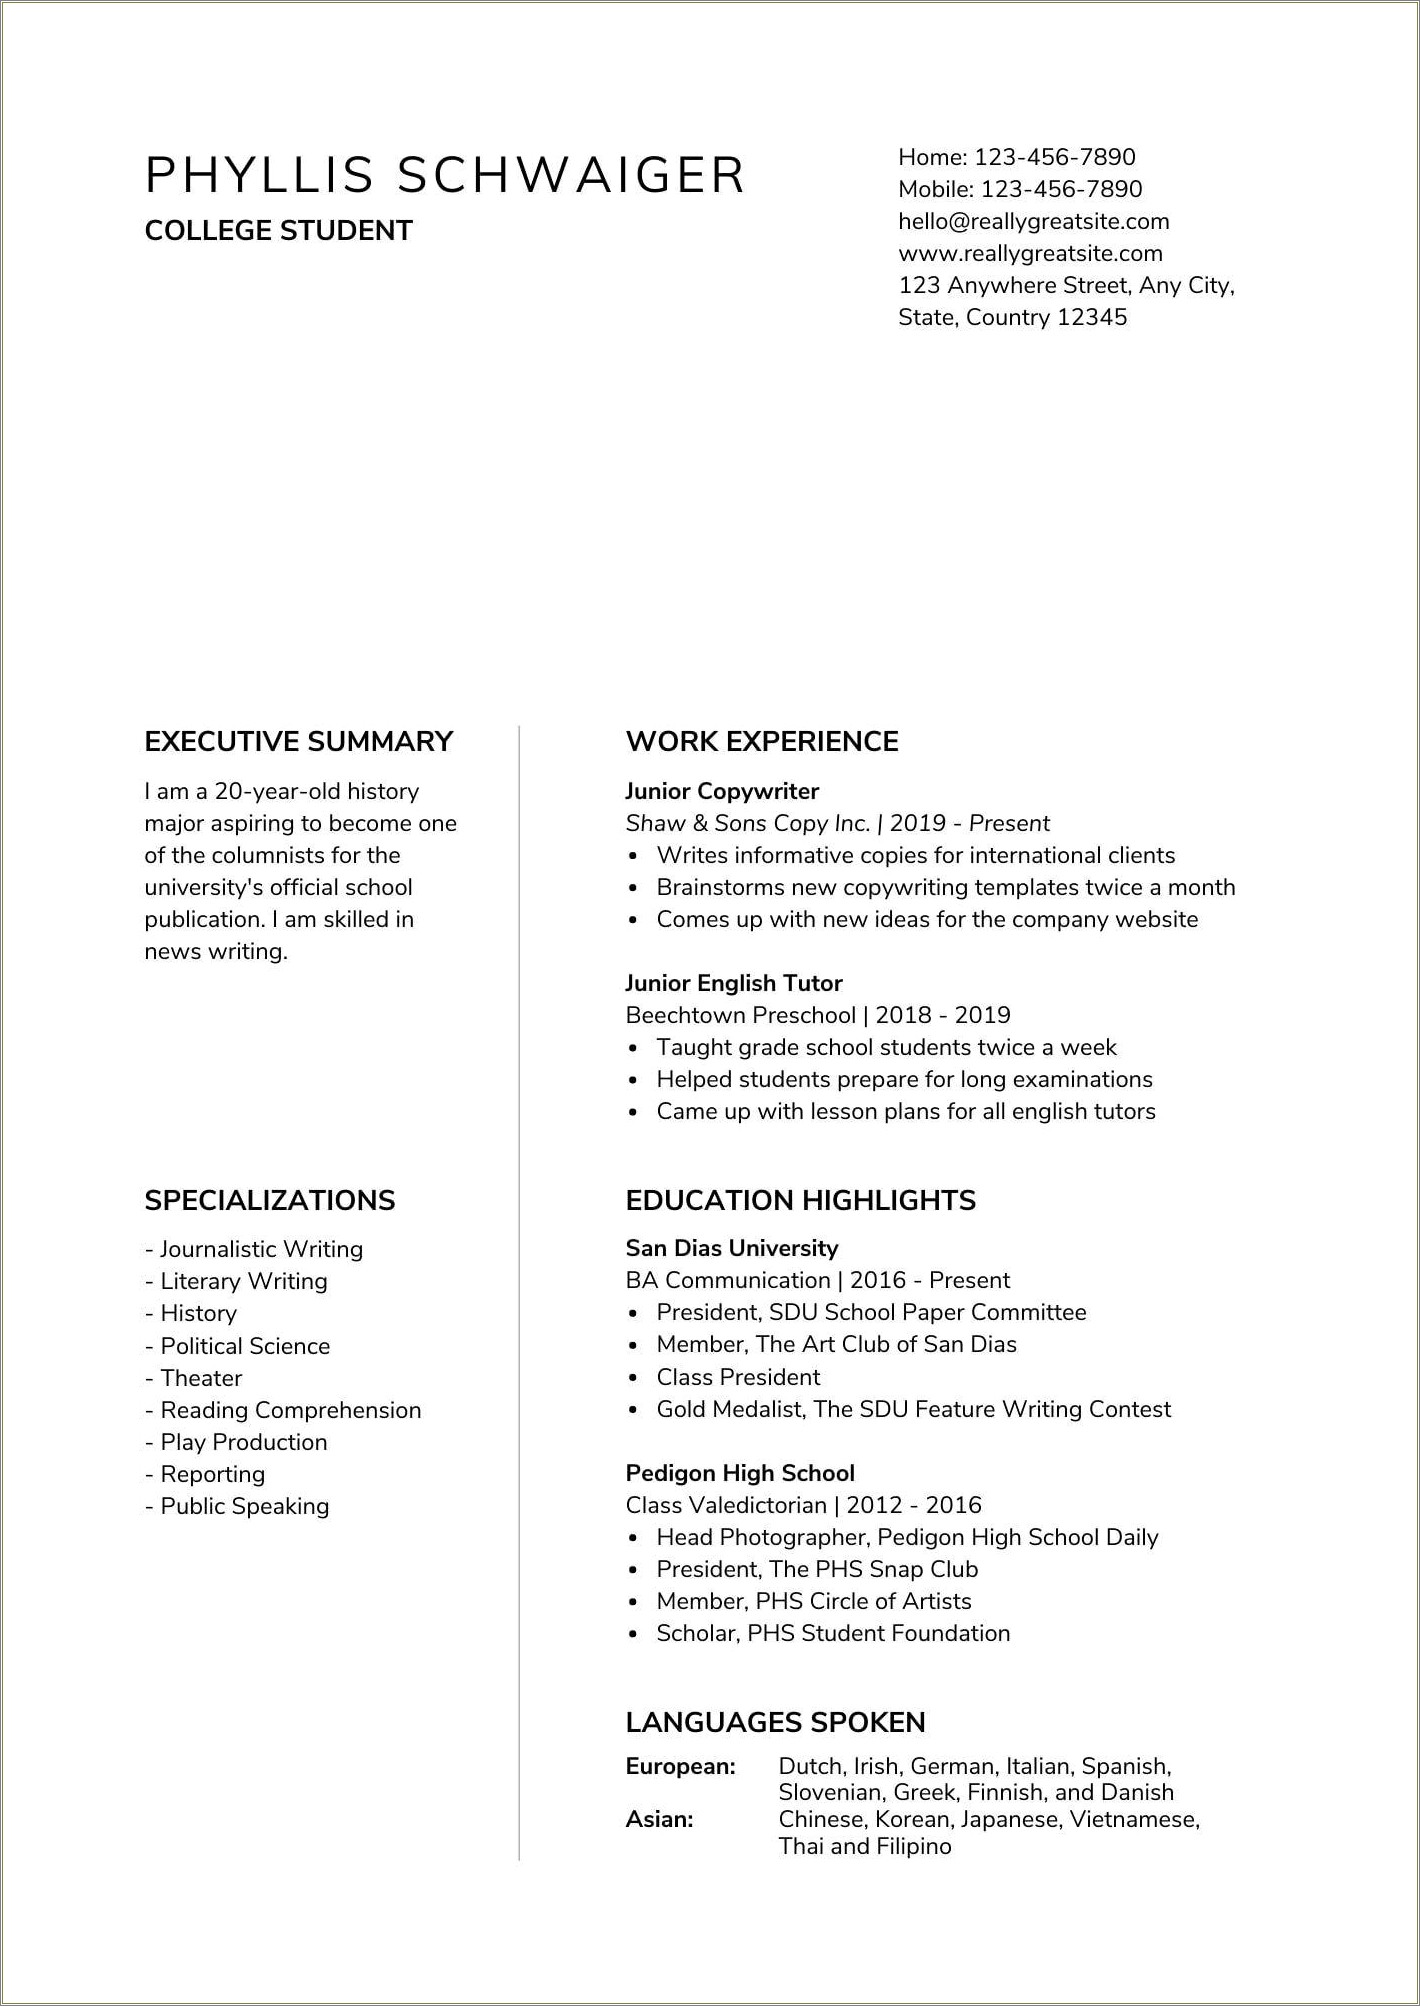 Sample First Job Resume Objective